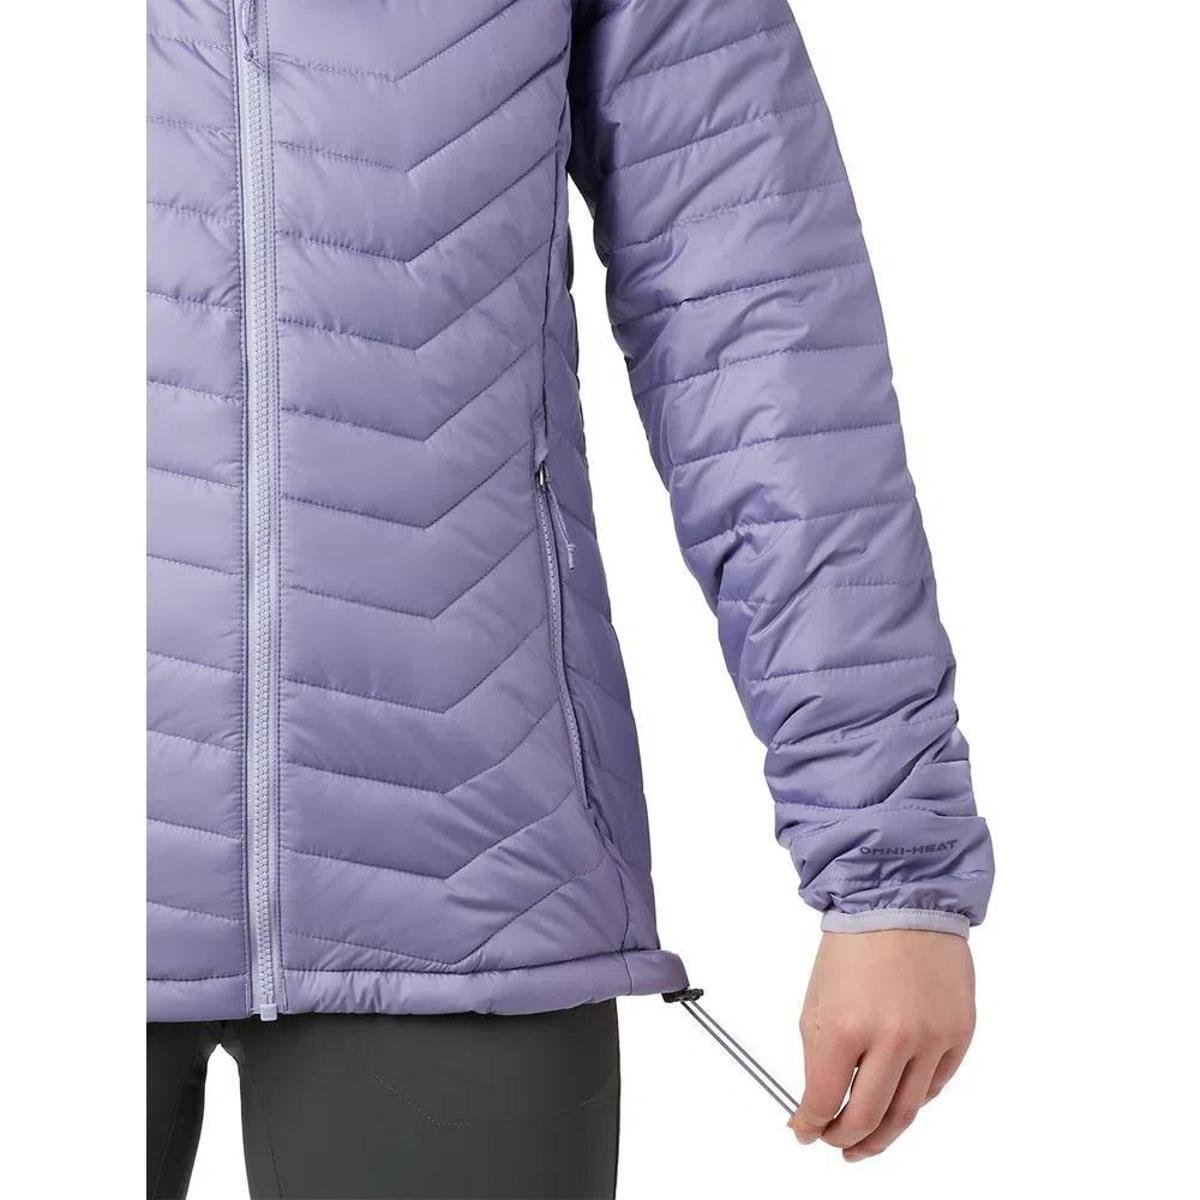 Columbia Womens Powder Lite Hooded Winter Jacket, Water repellent, X-Large, Cir